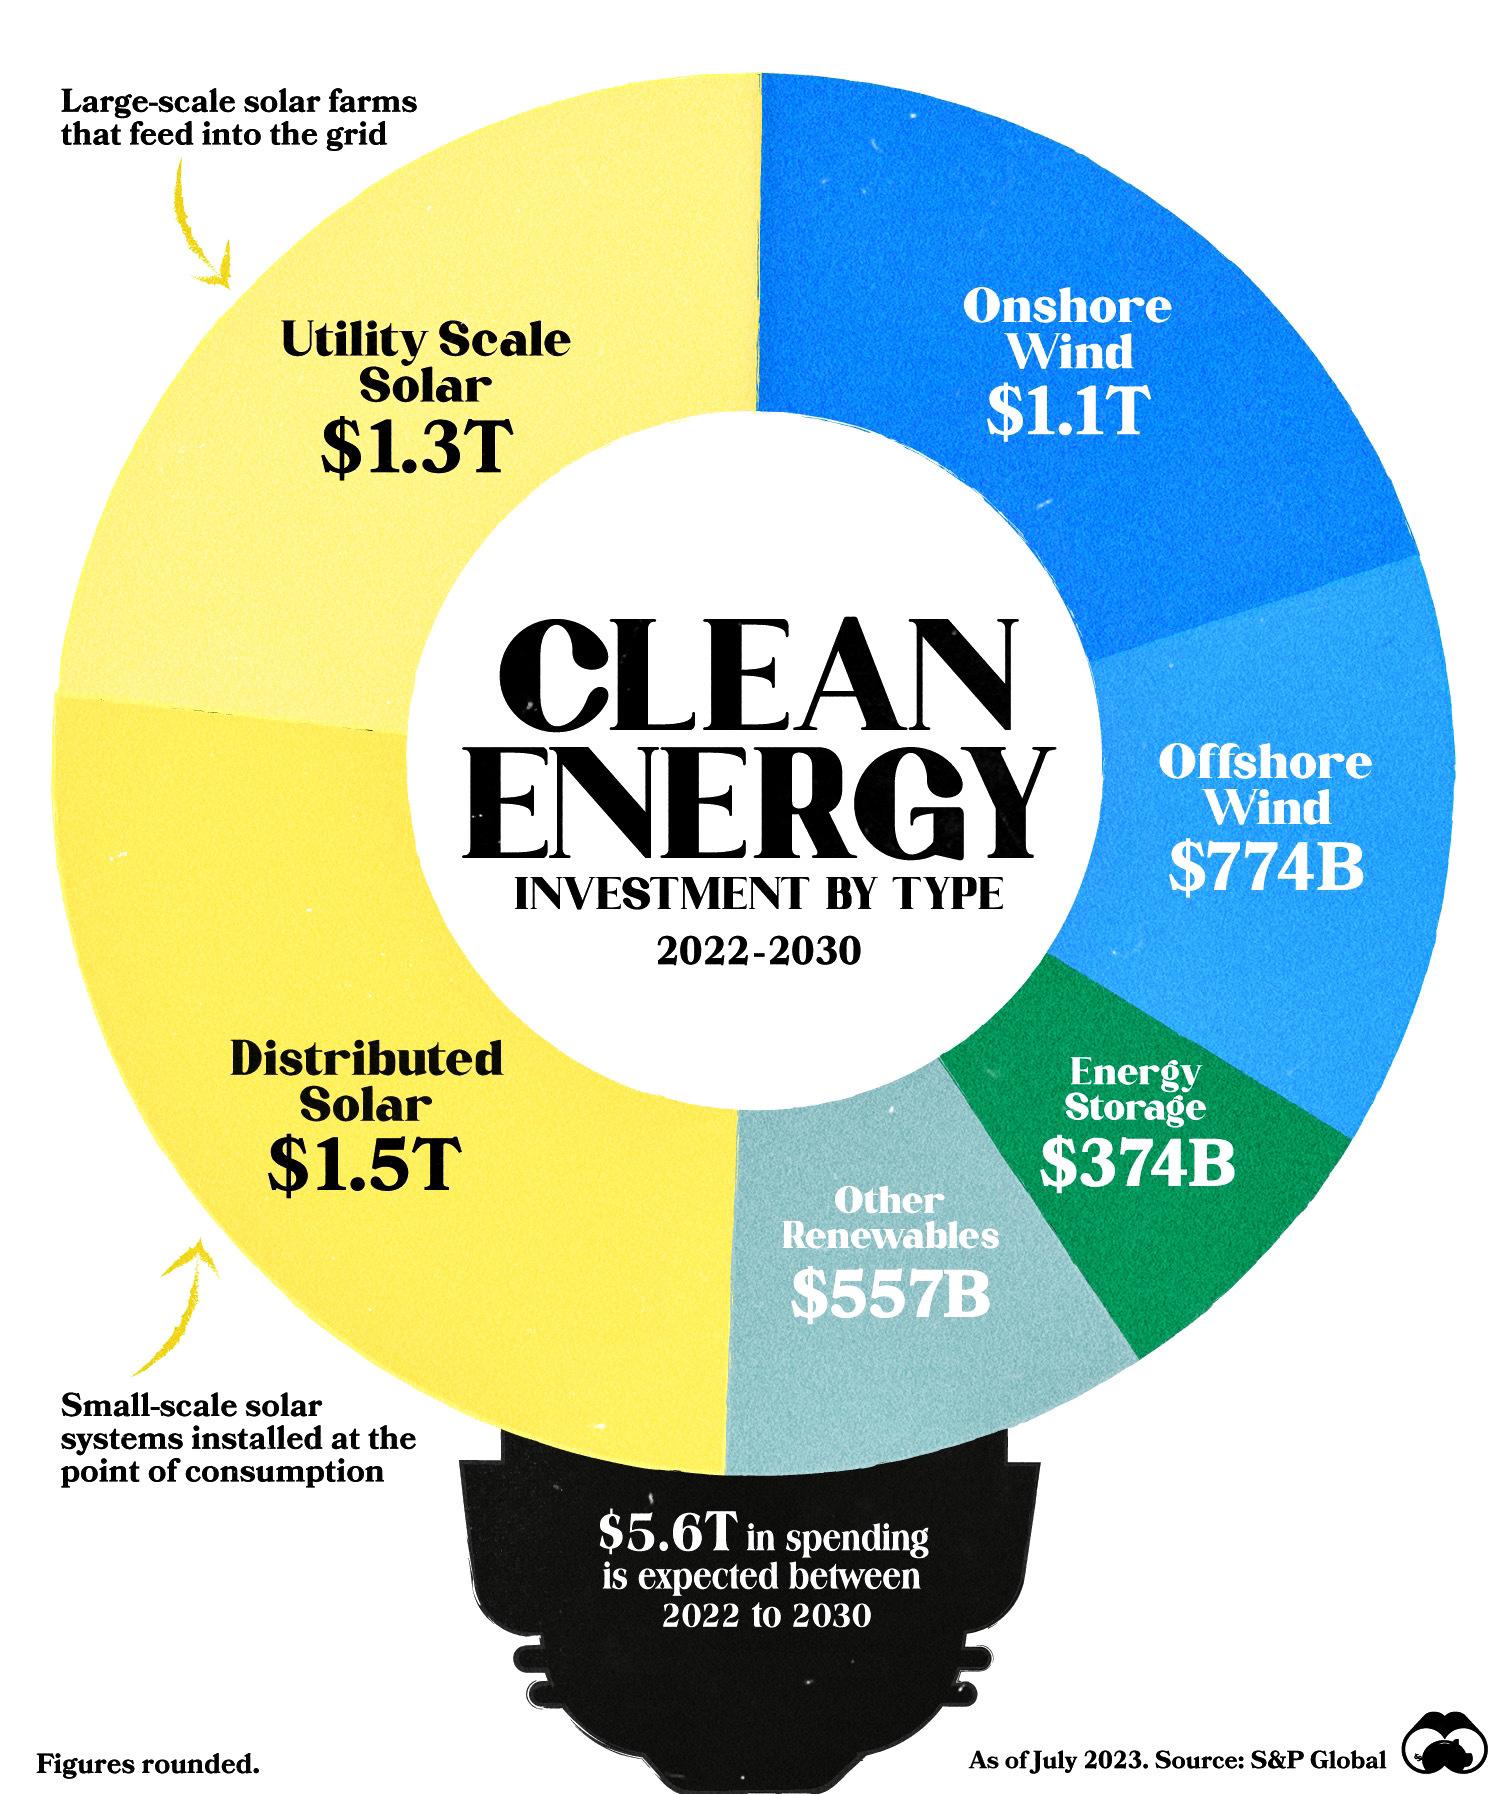 Breaking Down $5.6T in Clean Energy Investment (2022-2030) 💡